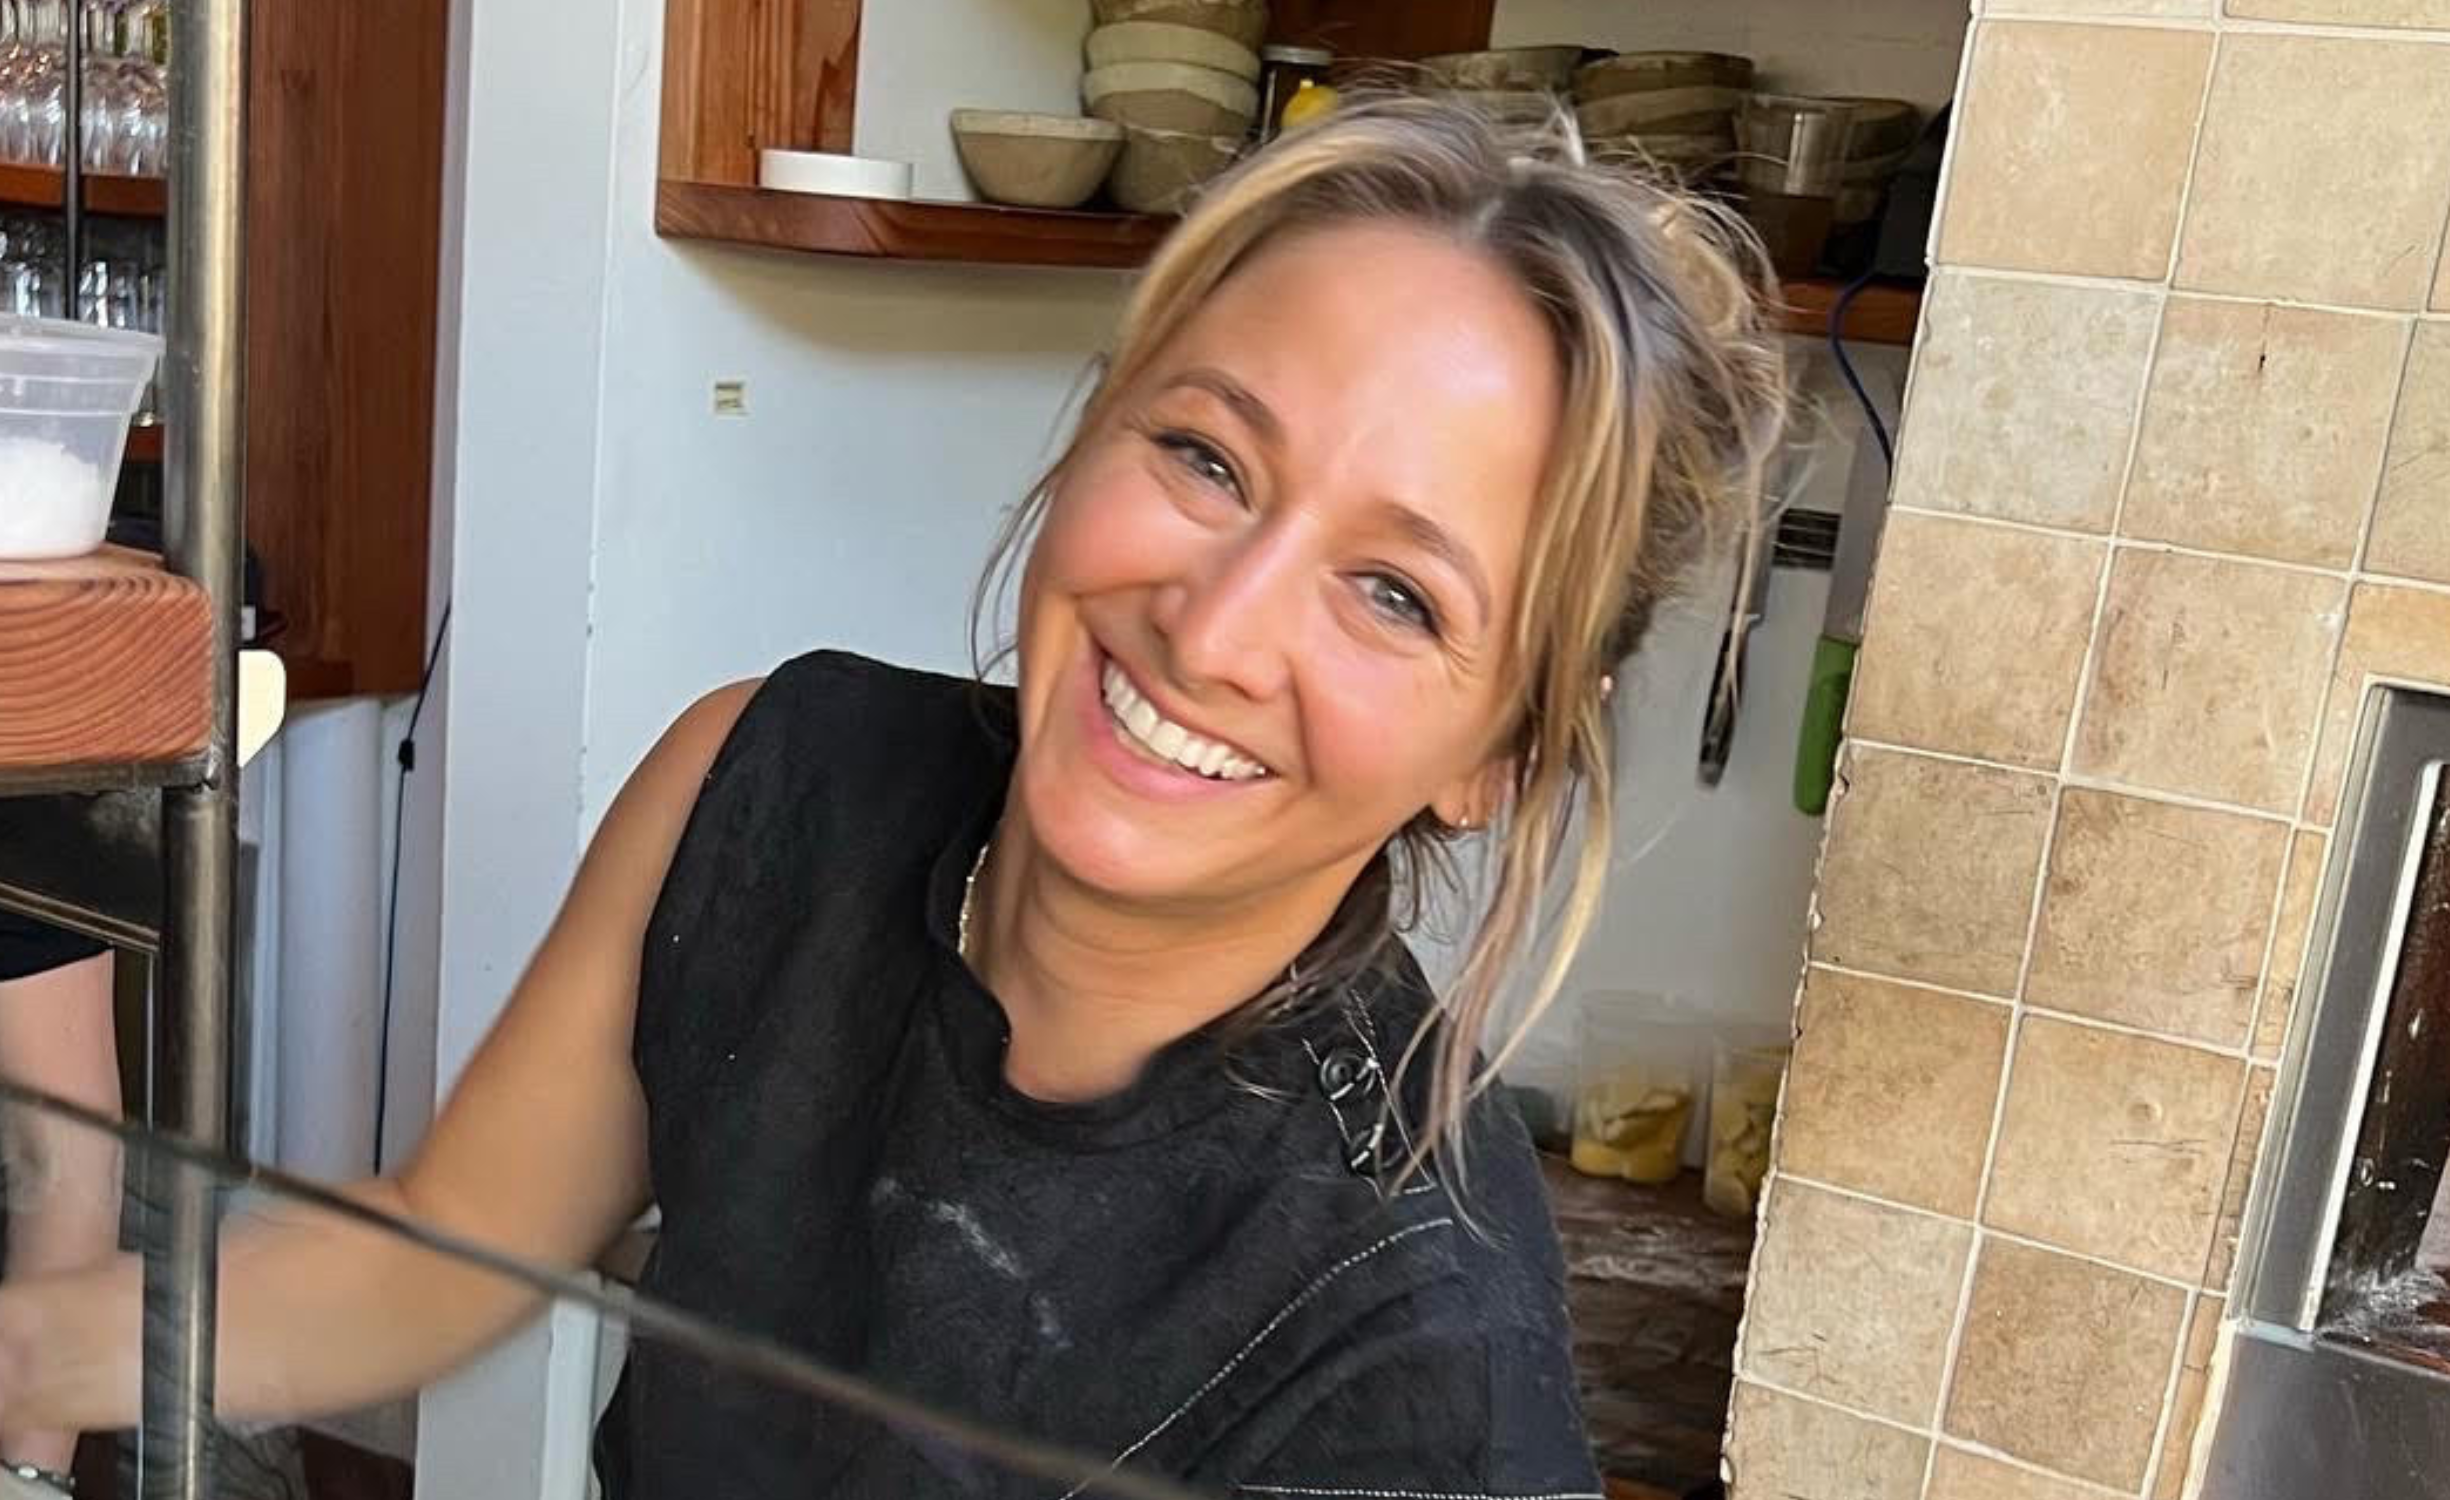 Her restaurant life? It’s “crazy and wonderful”